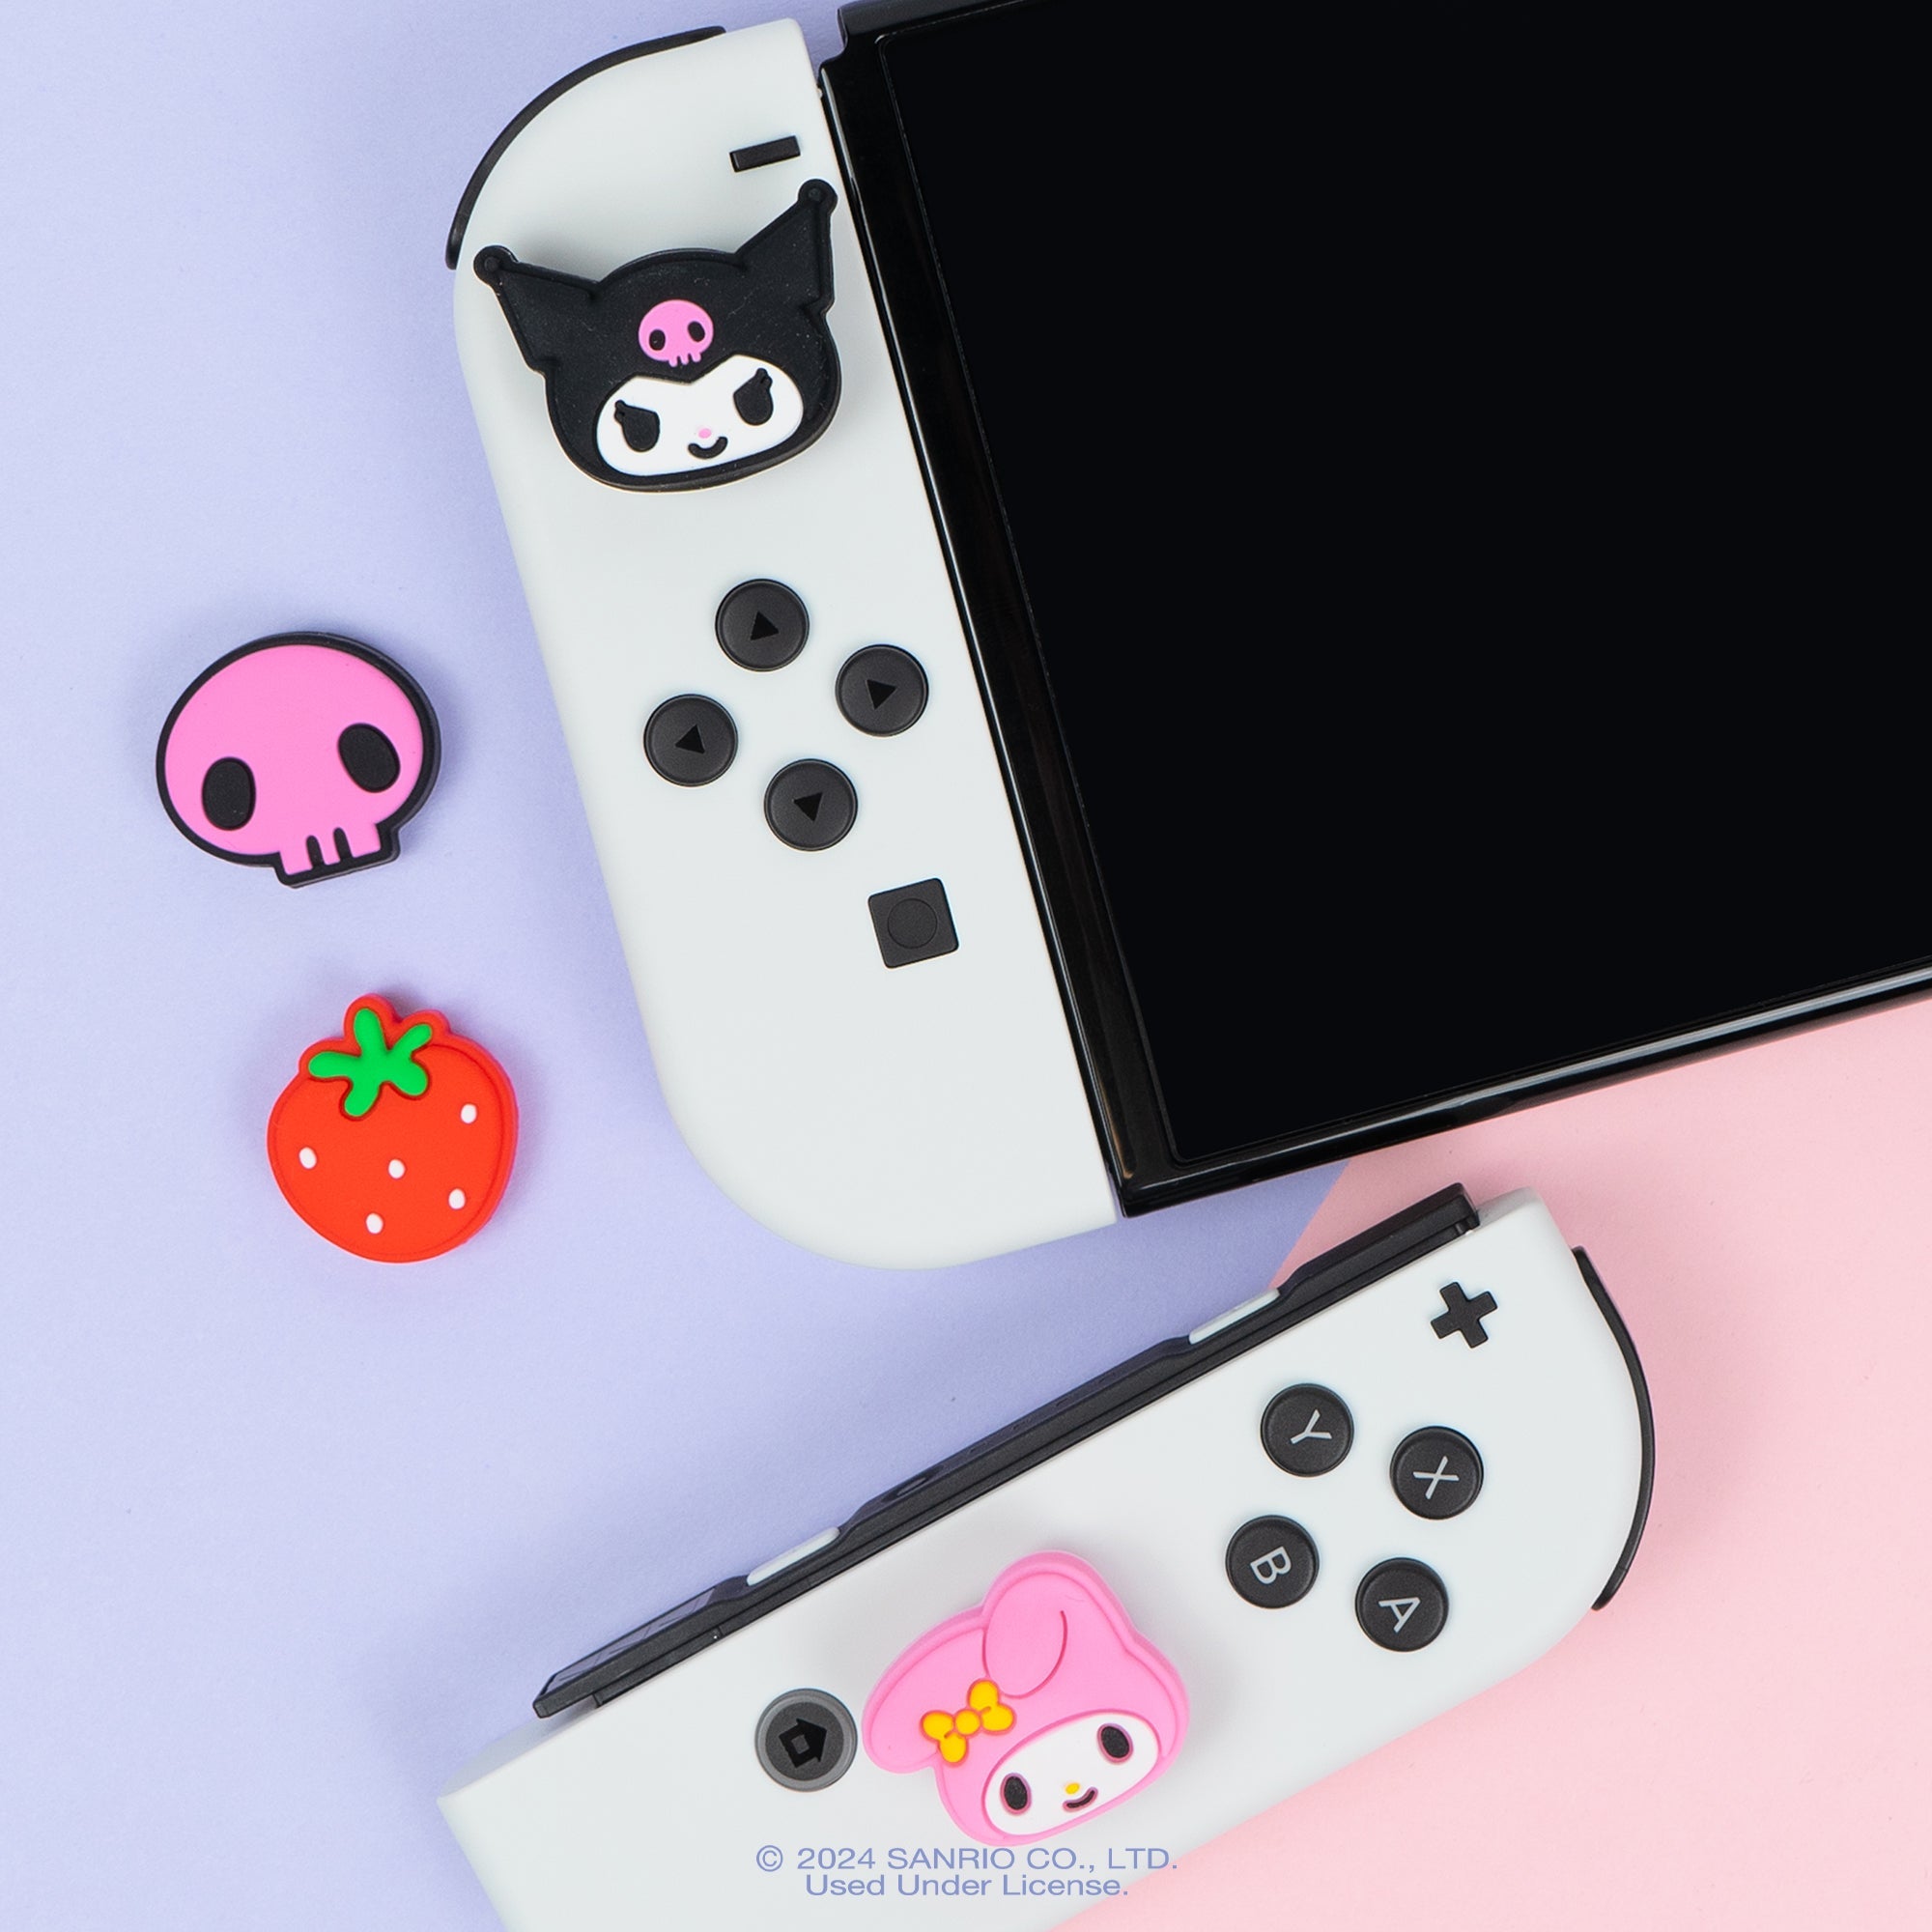 Hello Kitty and Friends Switch Grip Caps (Kuromi + My Melody) Tech Accessory Hamee.com - Hamee US   